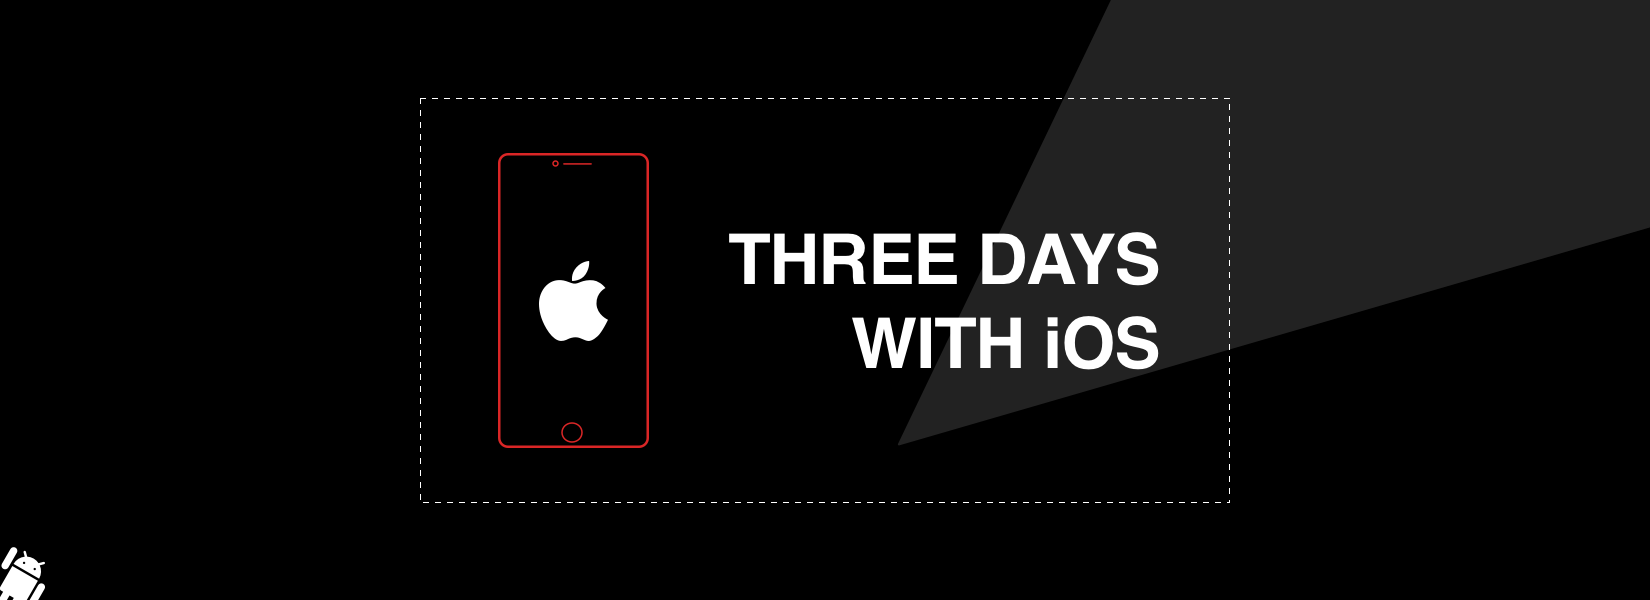 3 days with iOS - the Android user’s perspective